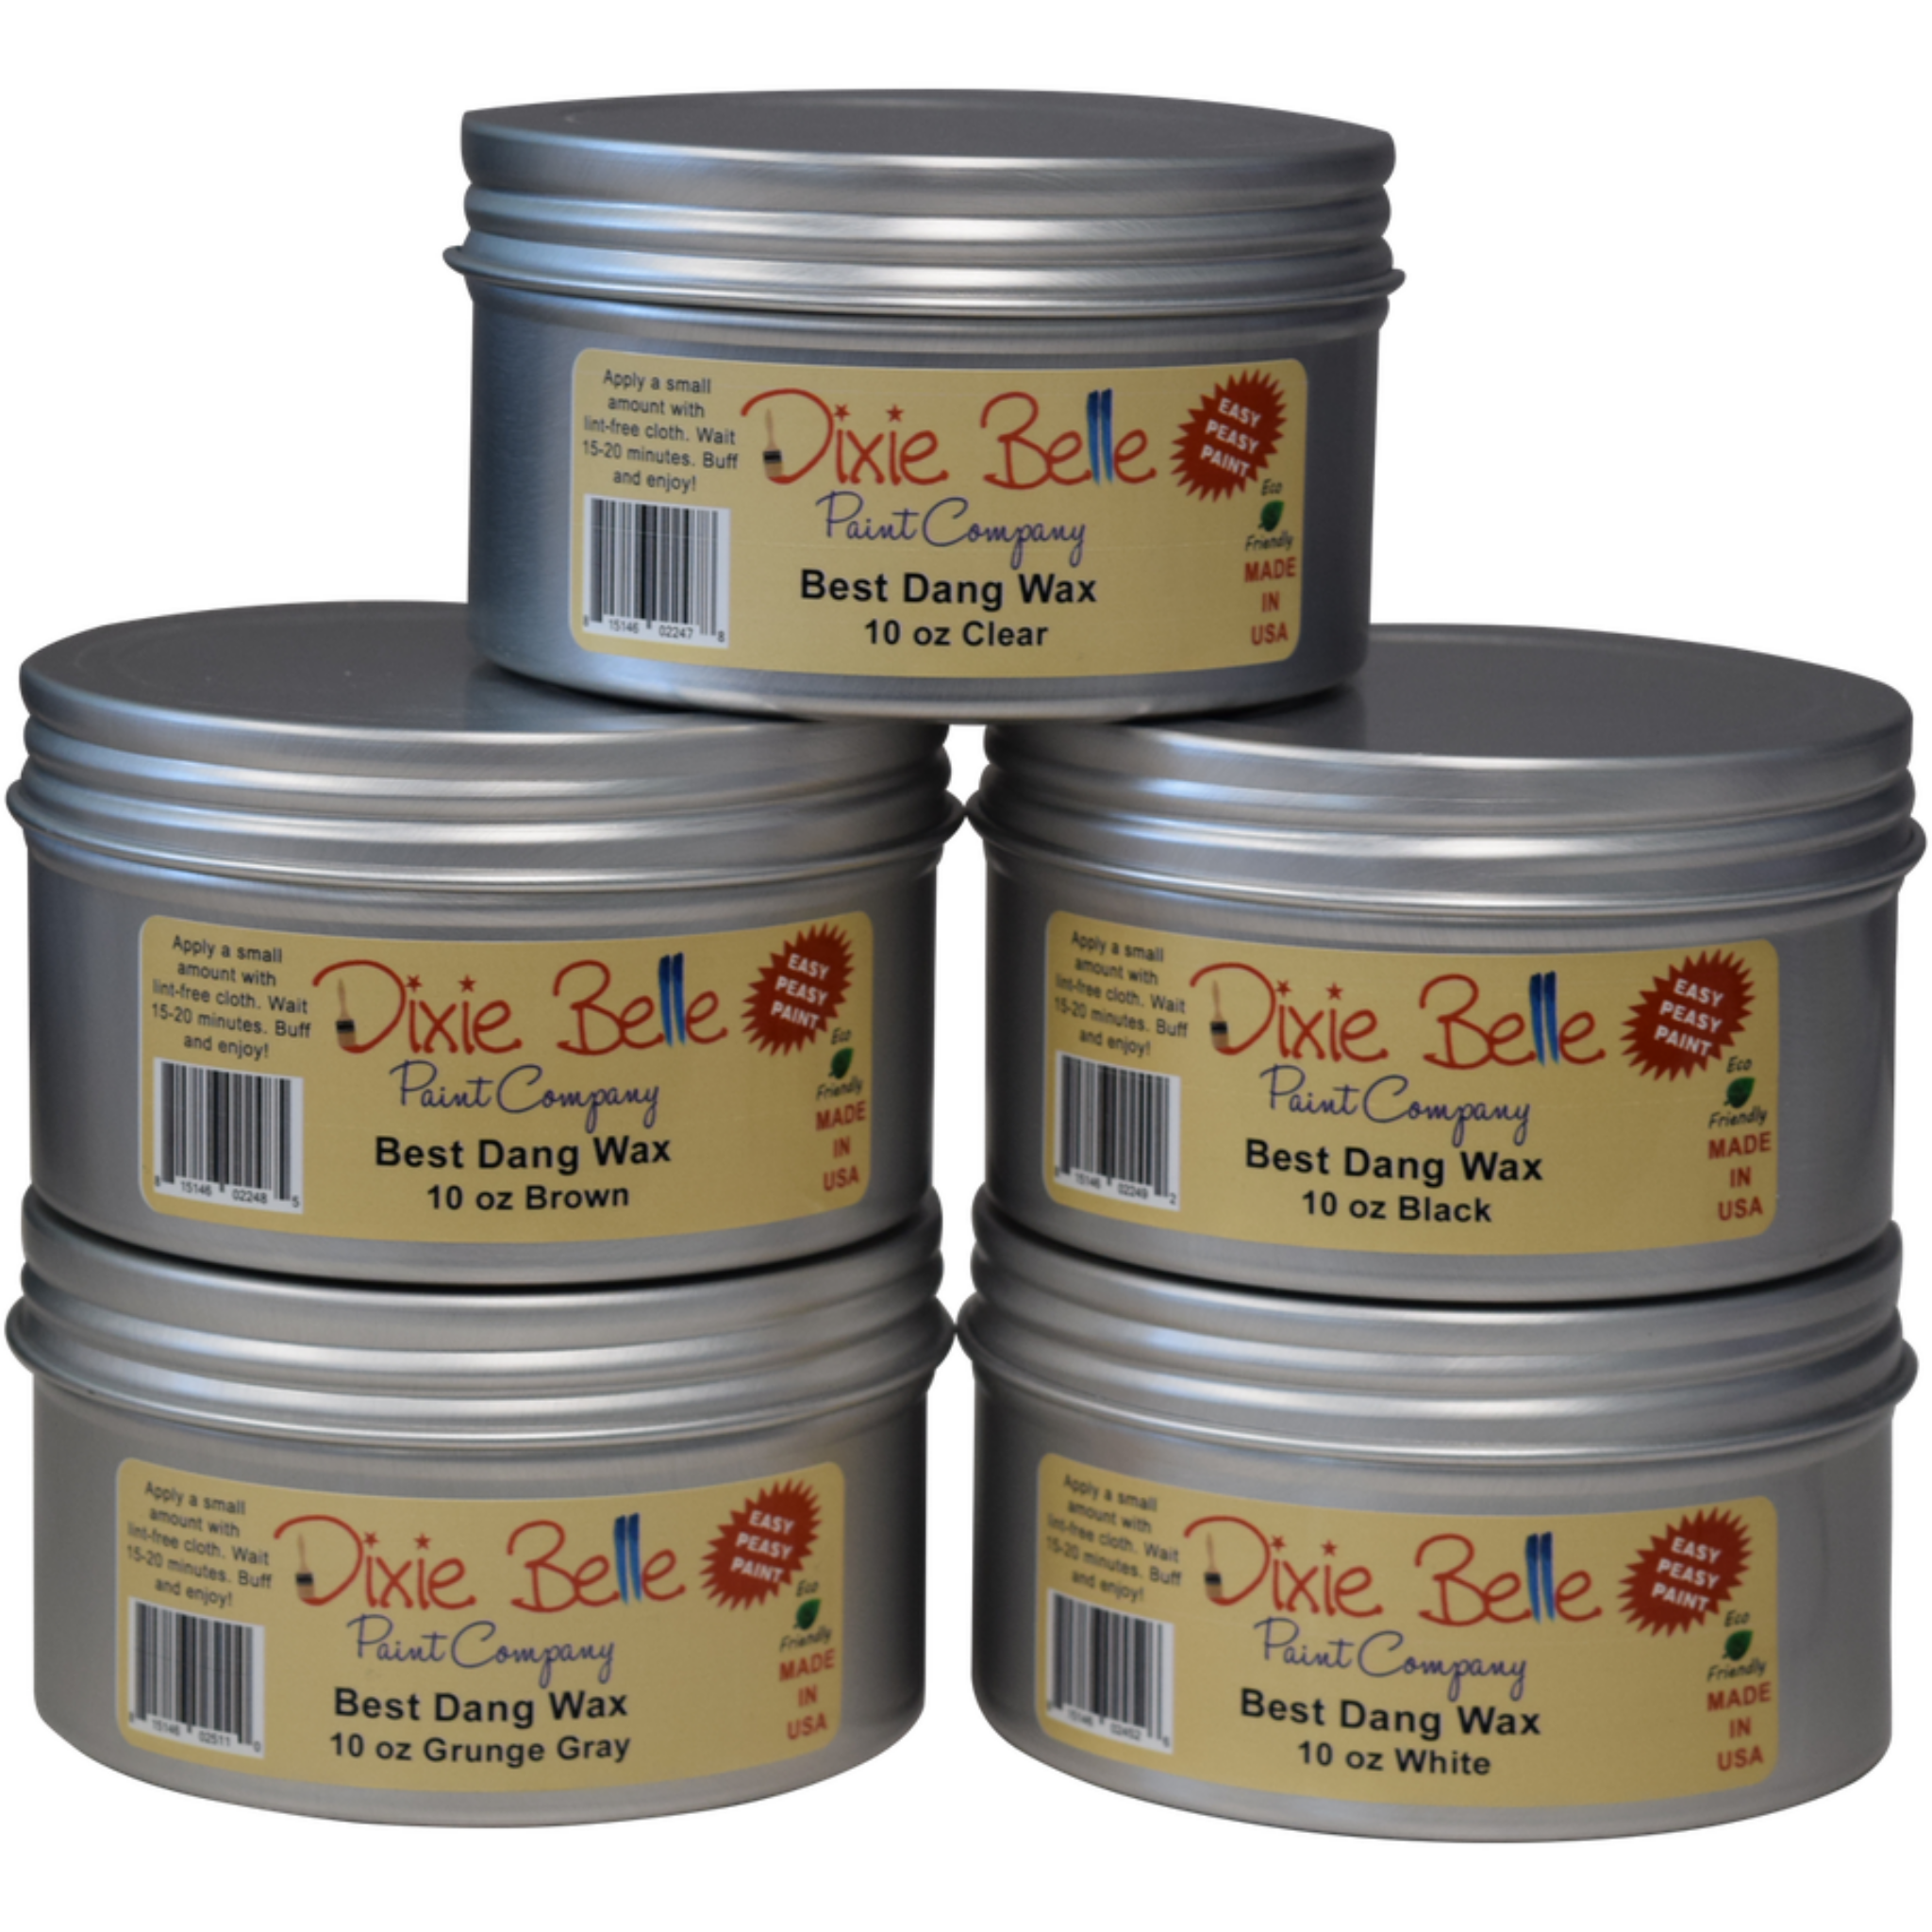 Five tin containers of Dixie Belle's Best Dang Wax. They are all 10 oz wax lidded containers. Clear wax. Brown wax. Black wax. Grunge gray wax. White wax.